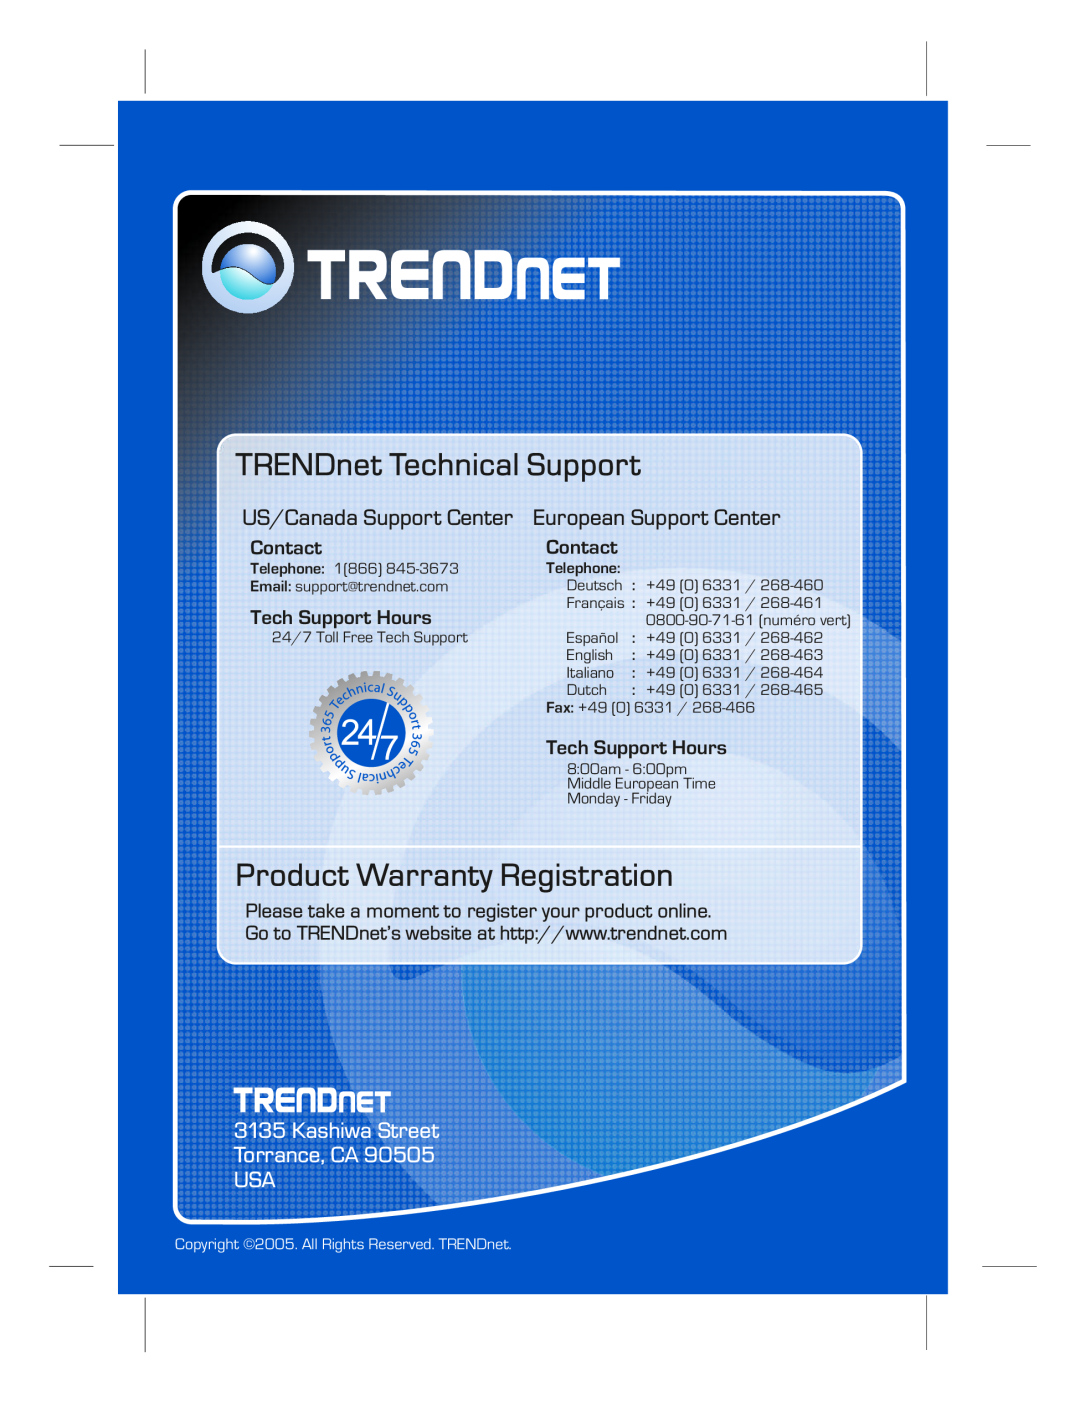 TRENDnet TEW-P21G TRENDnet Technical Support, Product Warranty Registration, Kashiwa Street Torrance, CA USA, Contact 